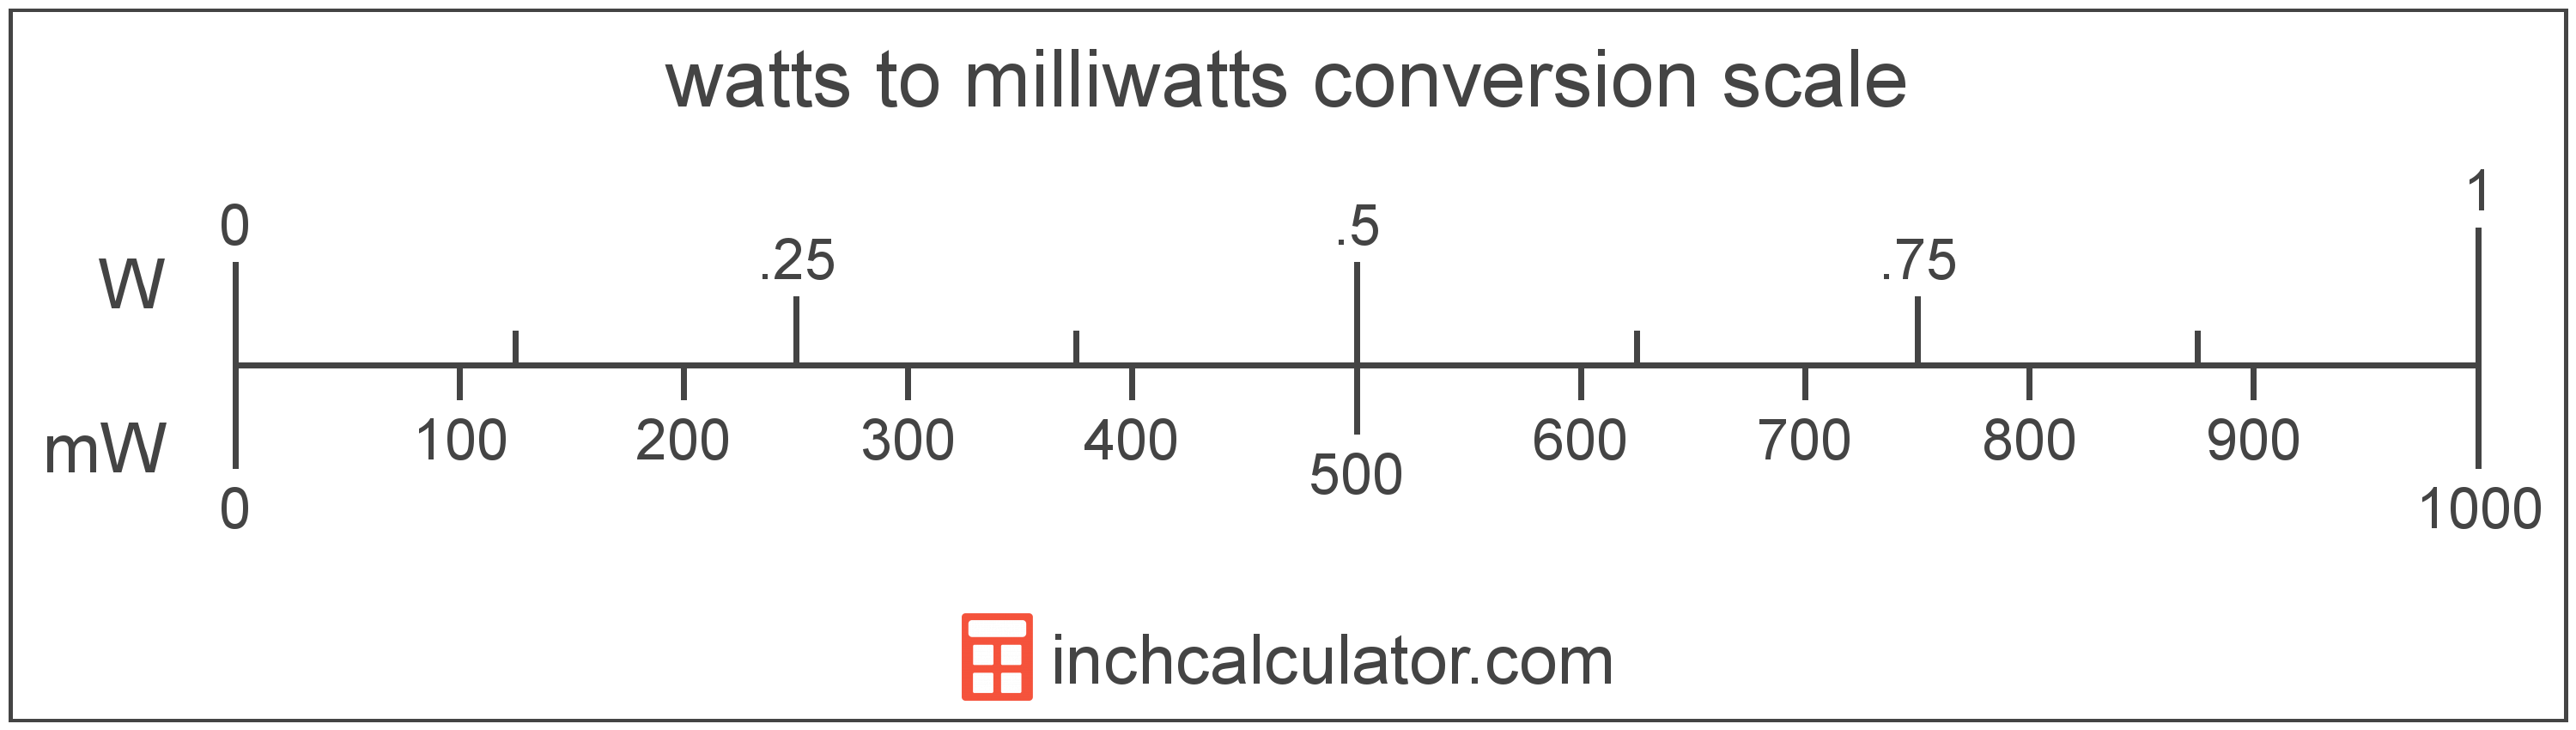 conversion scale showing watts and equivalent milliwatts power values